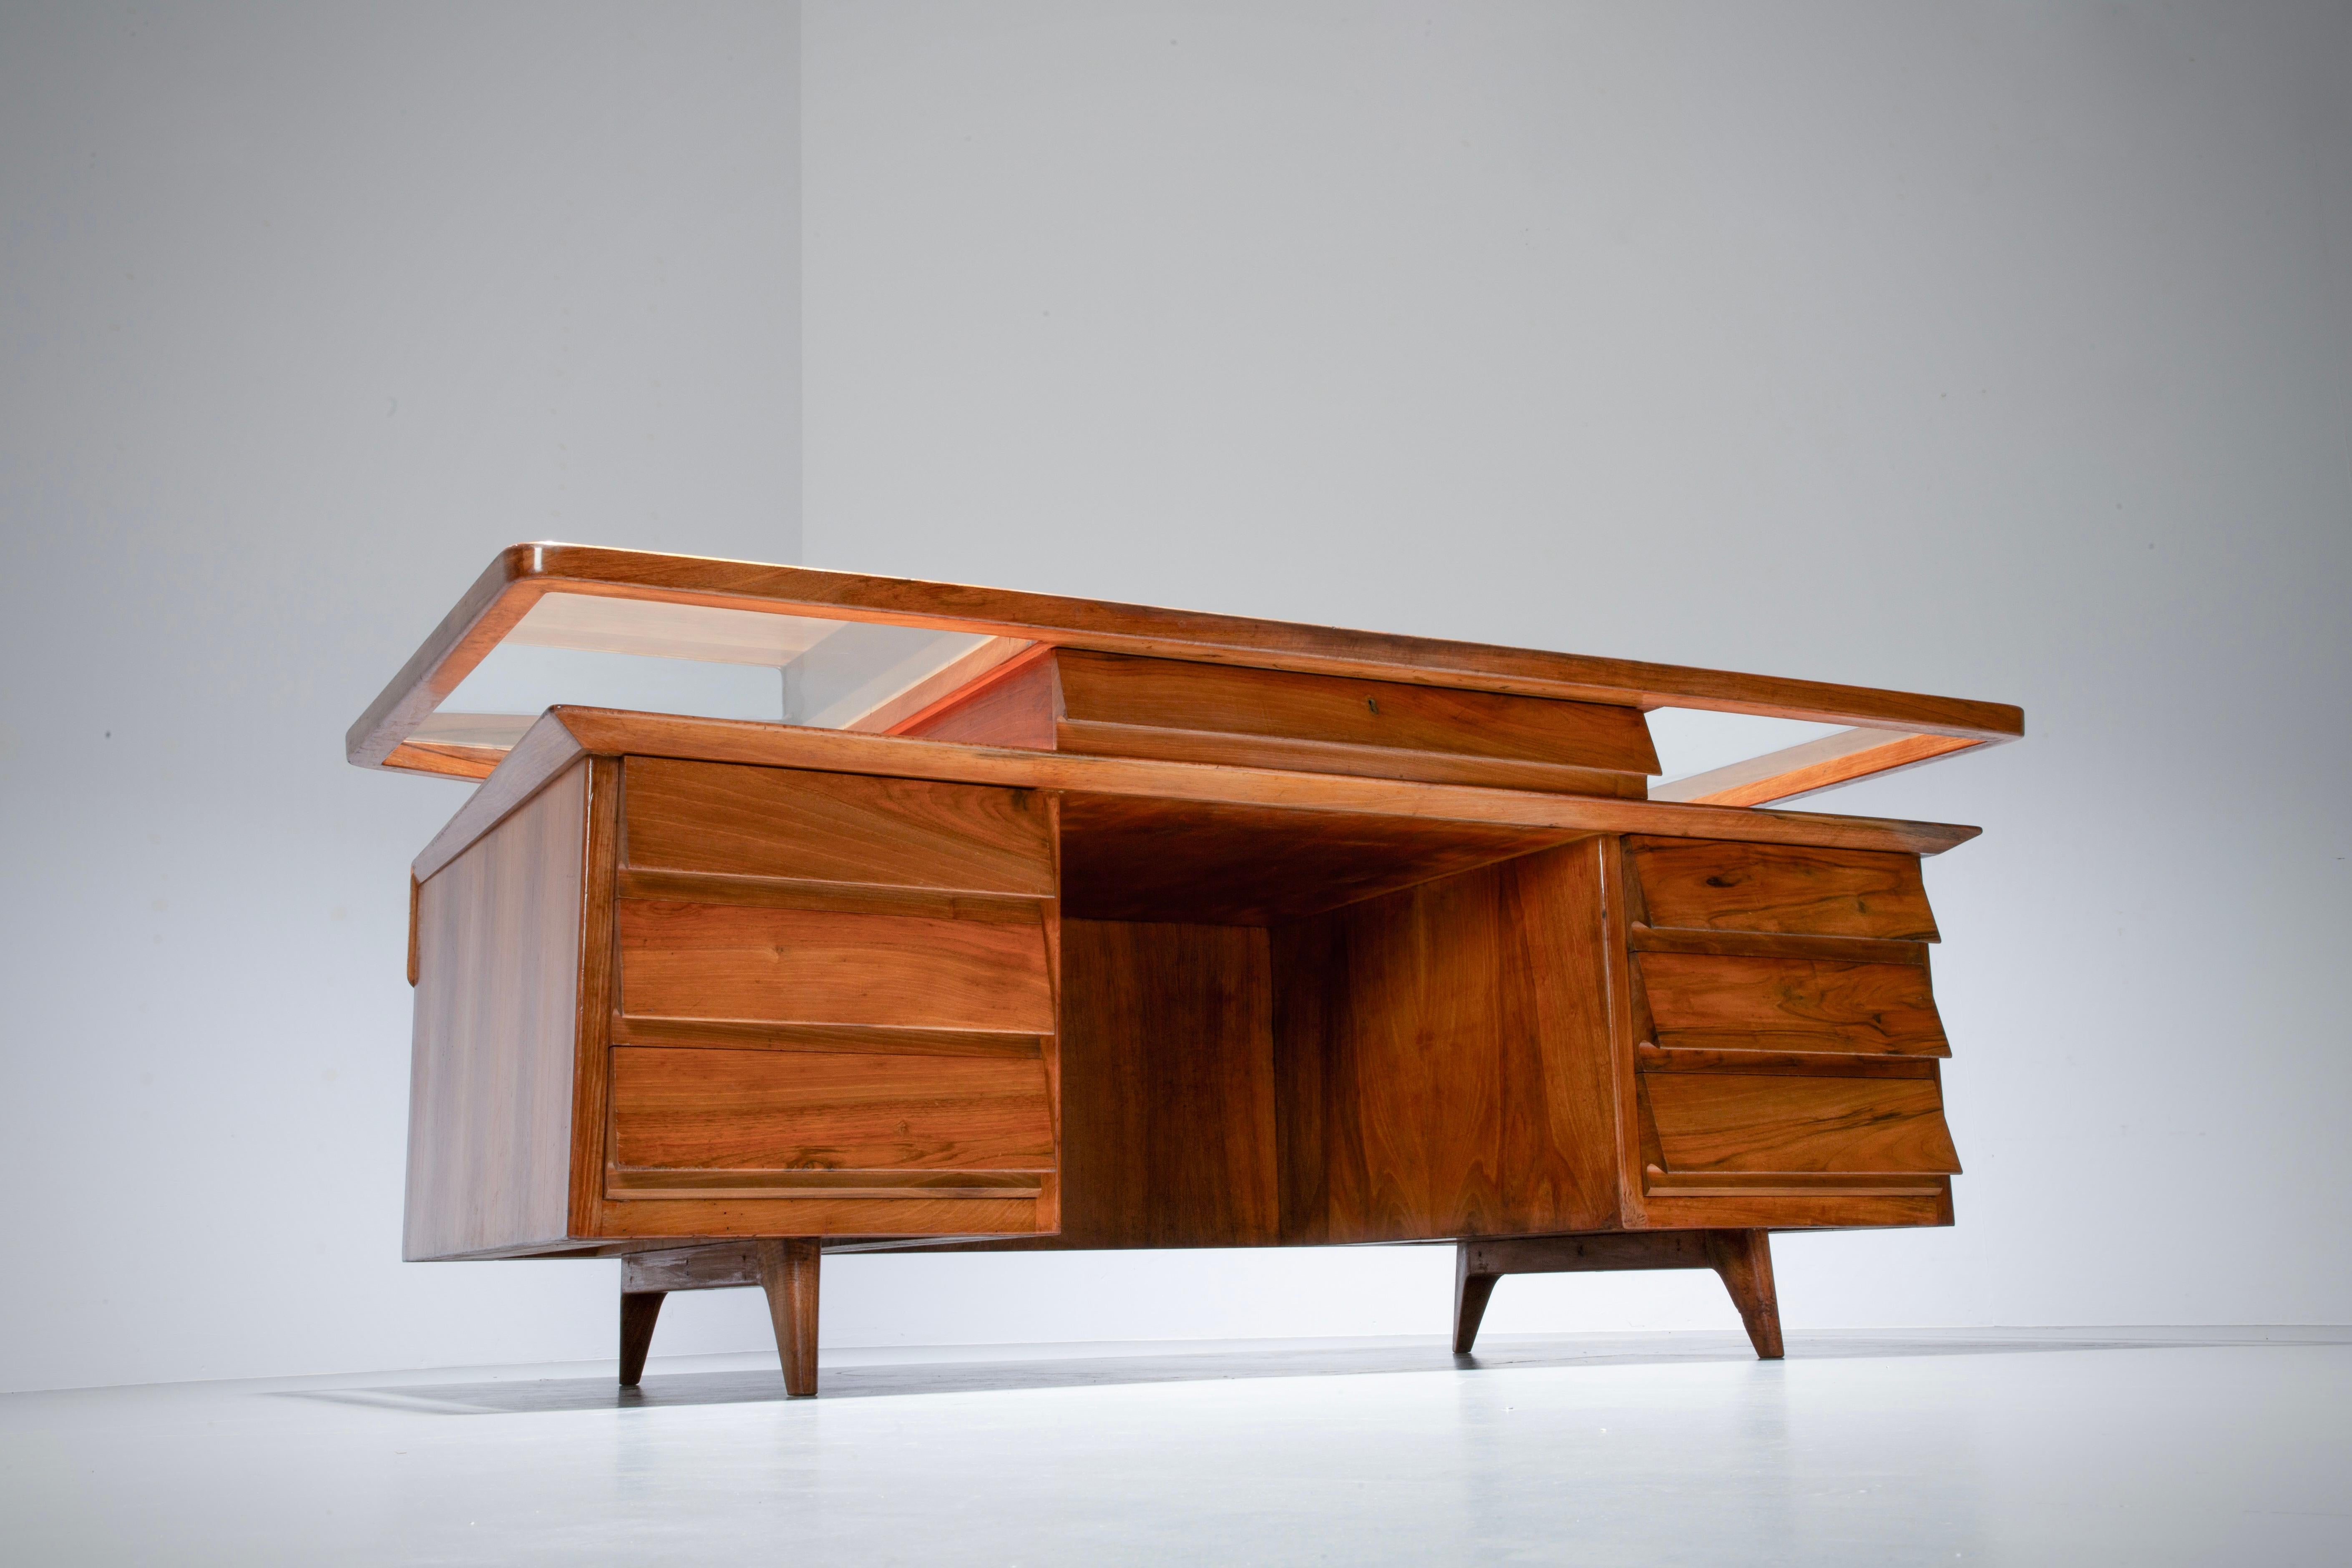 Italian Writing Desk by Silvio Cavatorta in Solid Walnut and Glass, Italy, 1950's For Sale